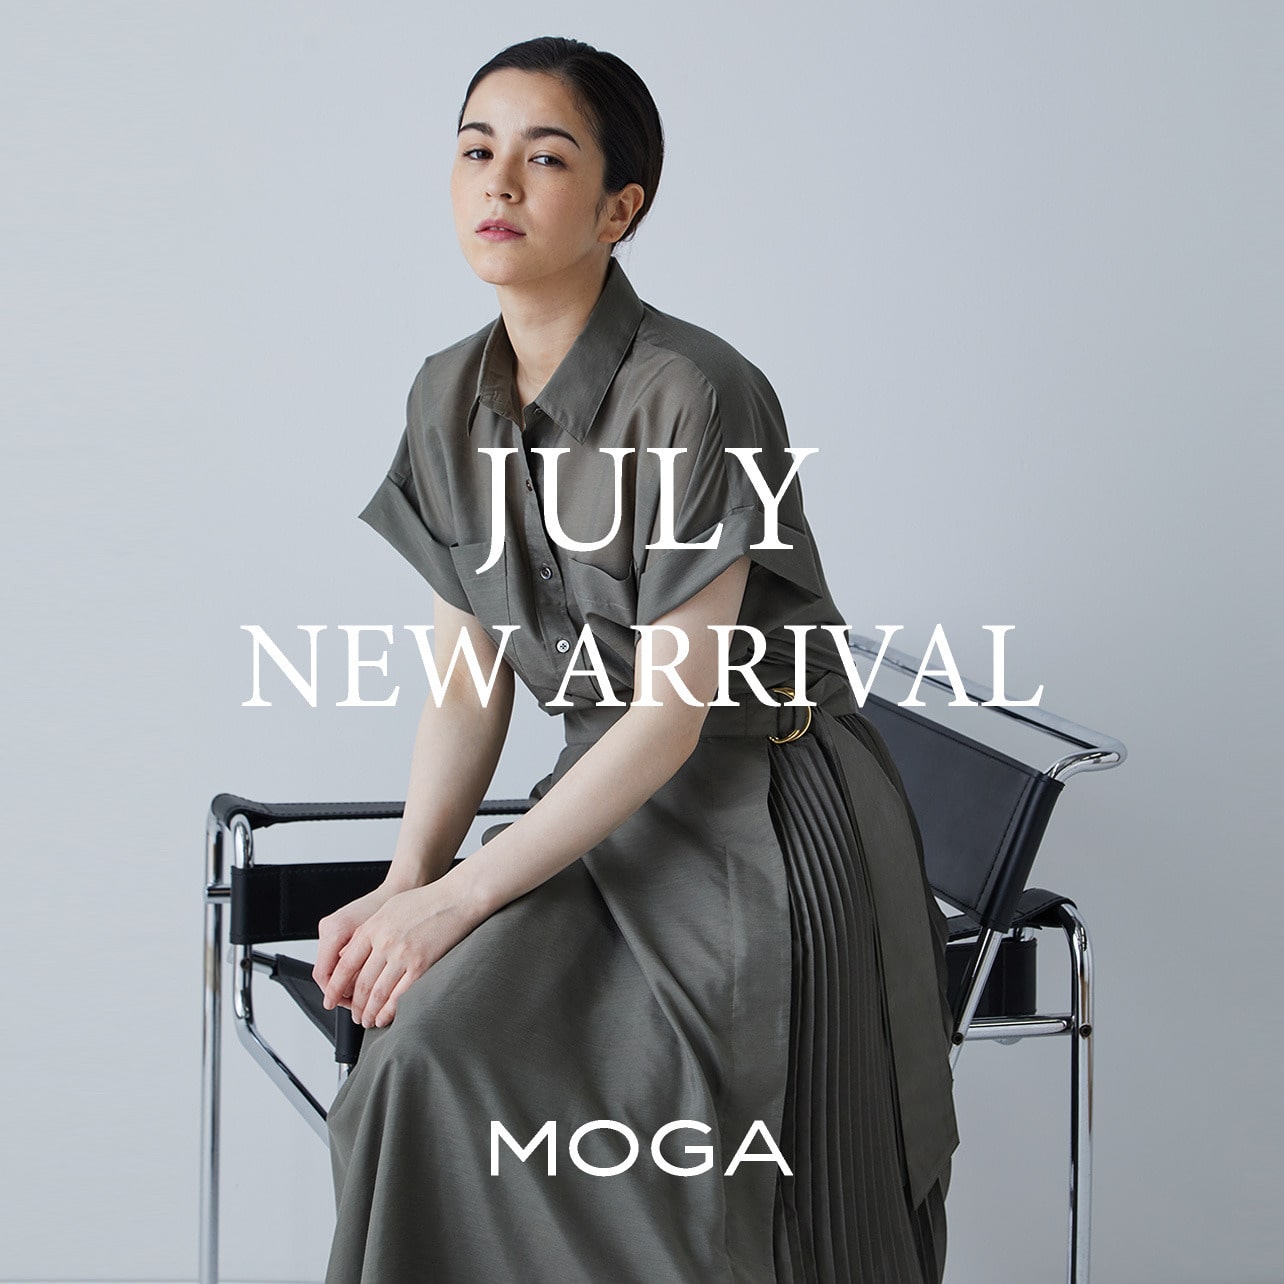 July new arrival